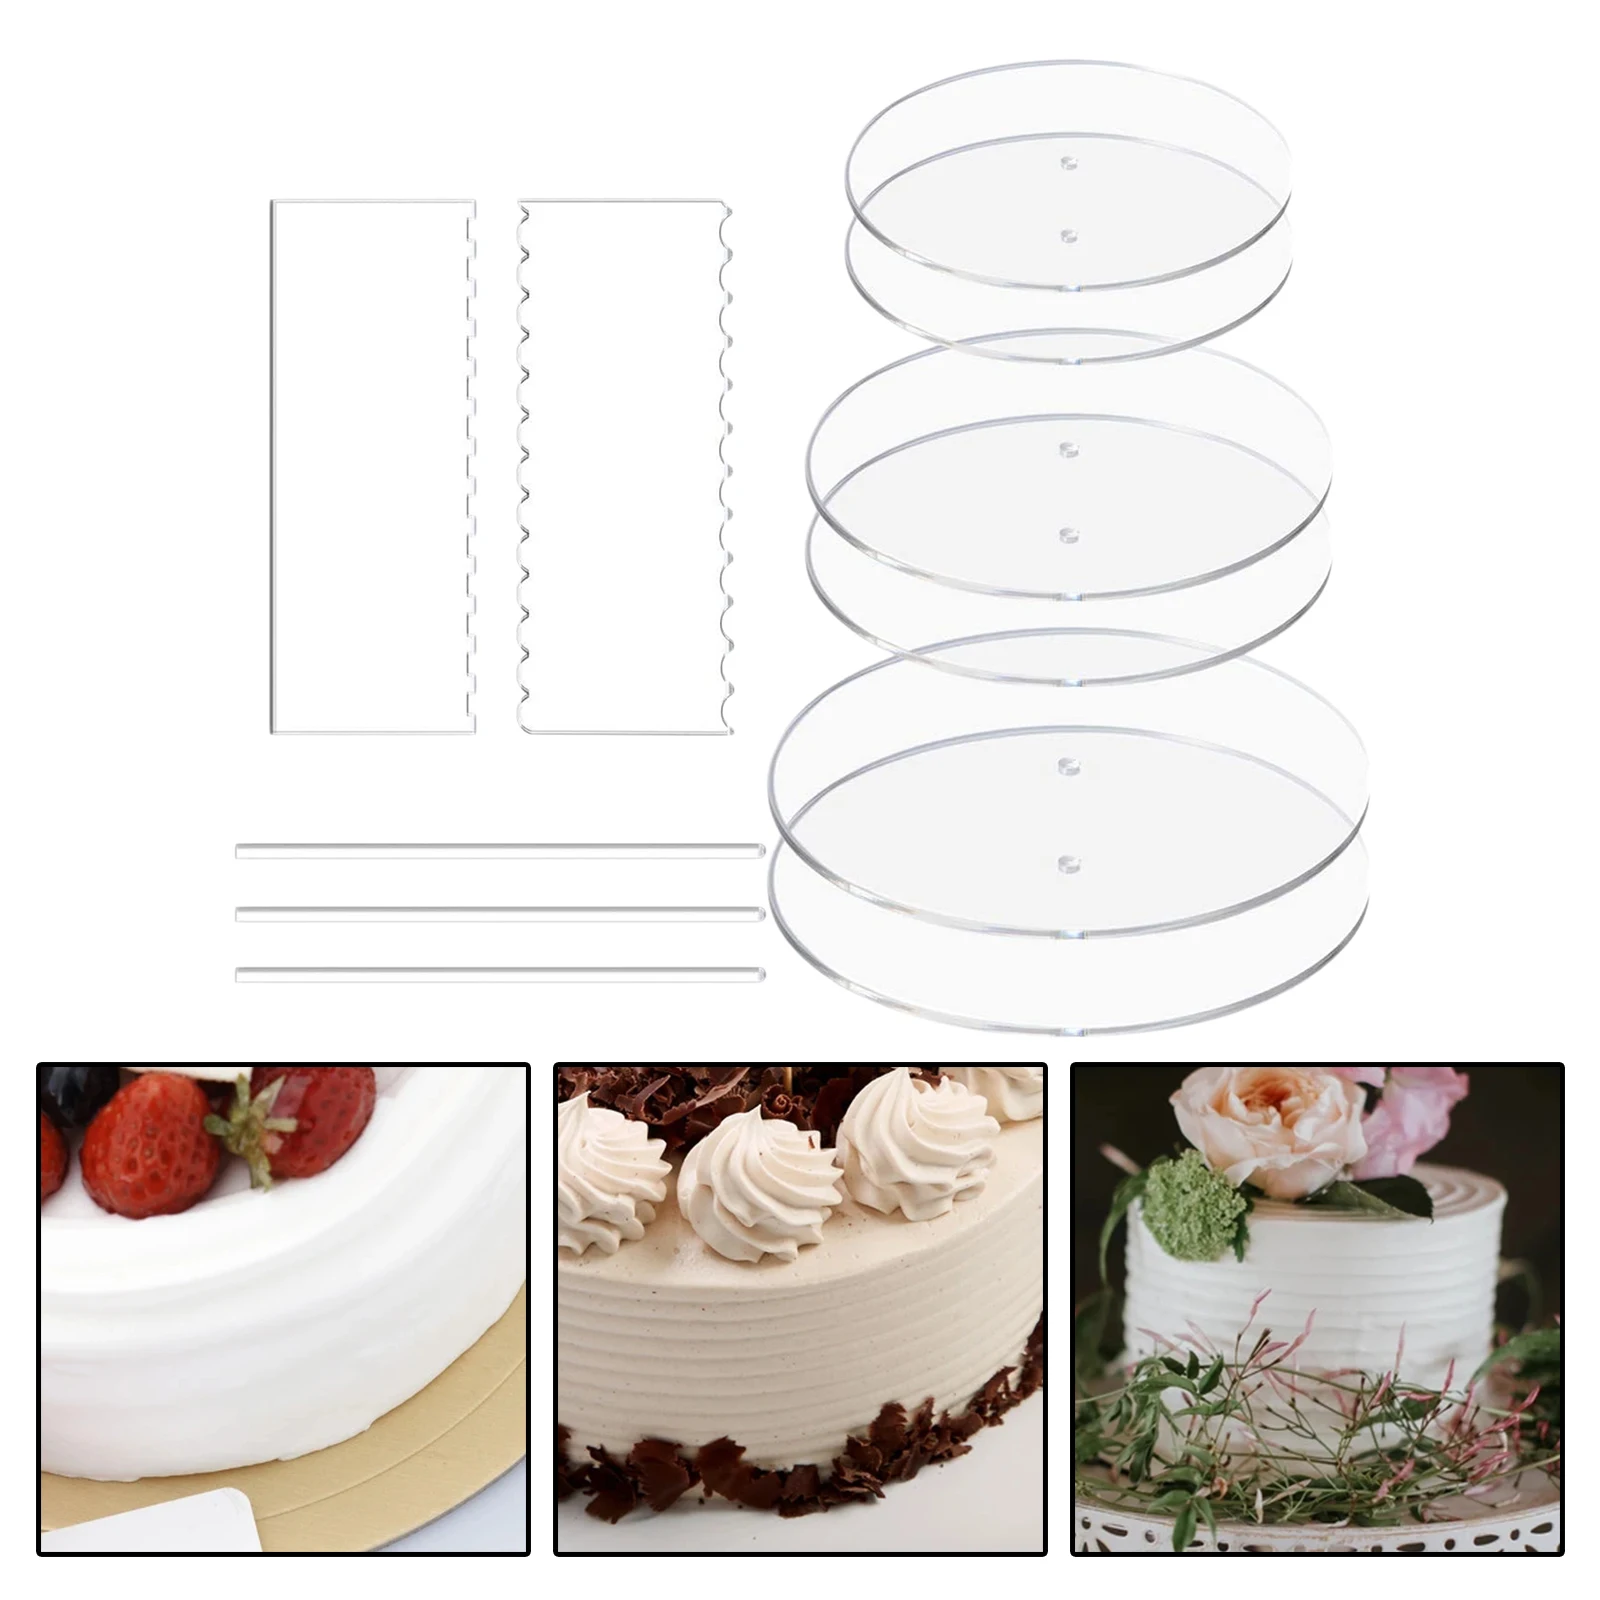  Cake Disk Set Comb Scrapers Dowel Rod Cake Discs with Center Hole Buttercream Cake Decorating Tools  Goods  